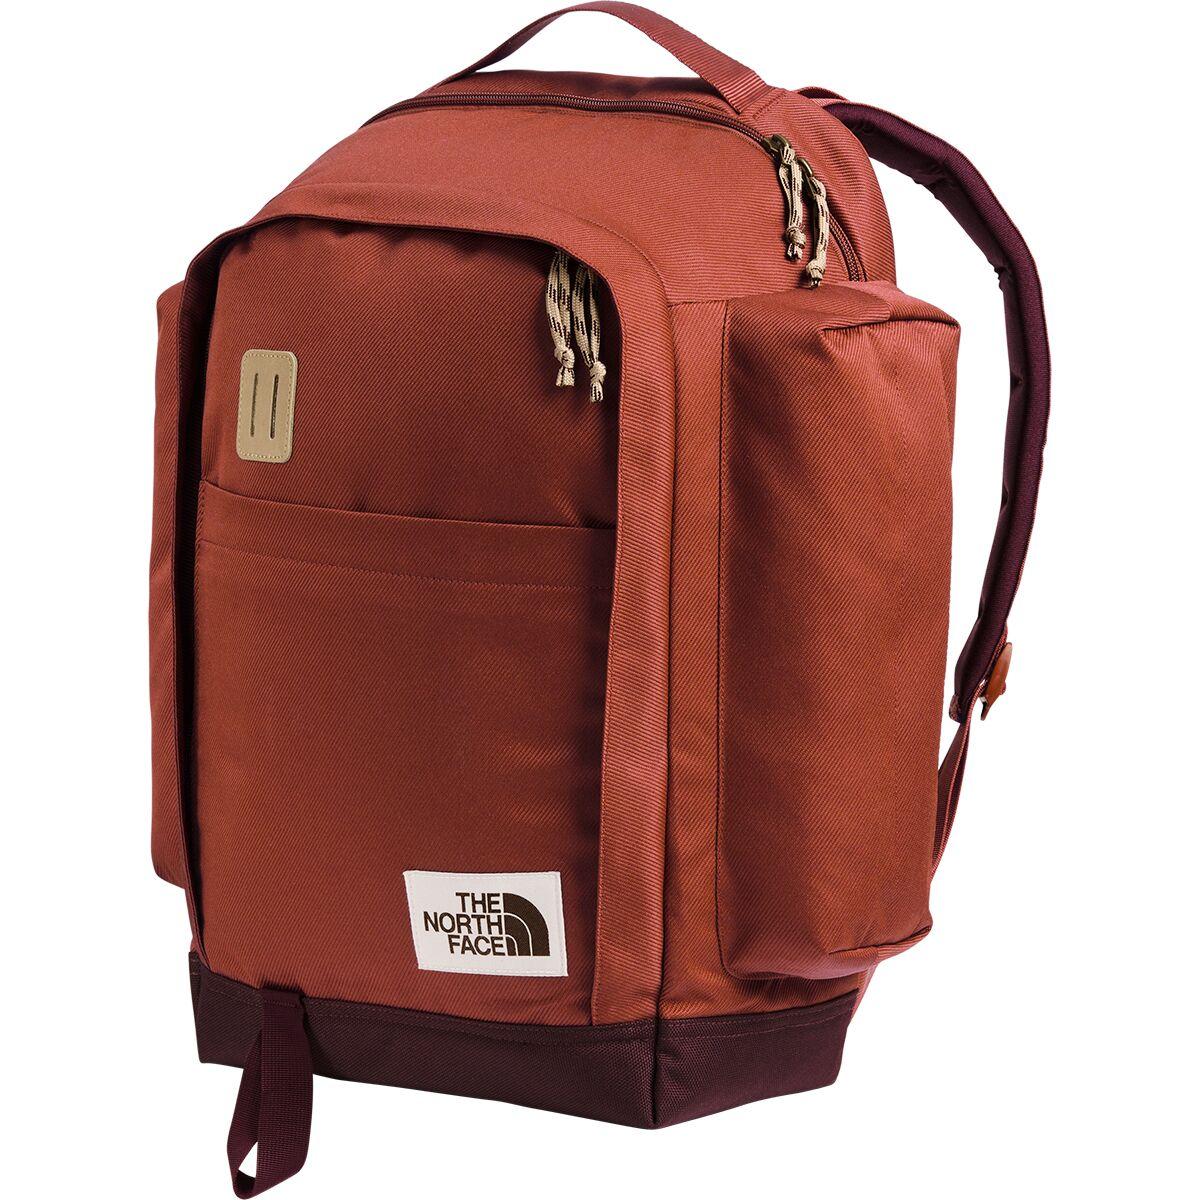 The North Face Ruthsac Backpack new Zealand, SAVE 35% - aveclumiere.com